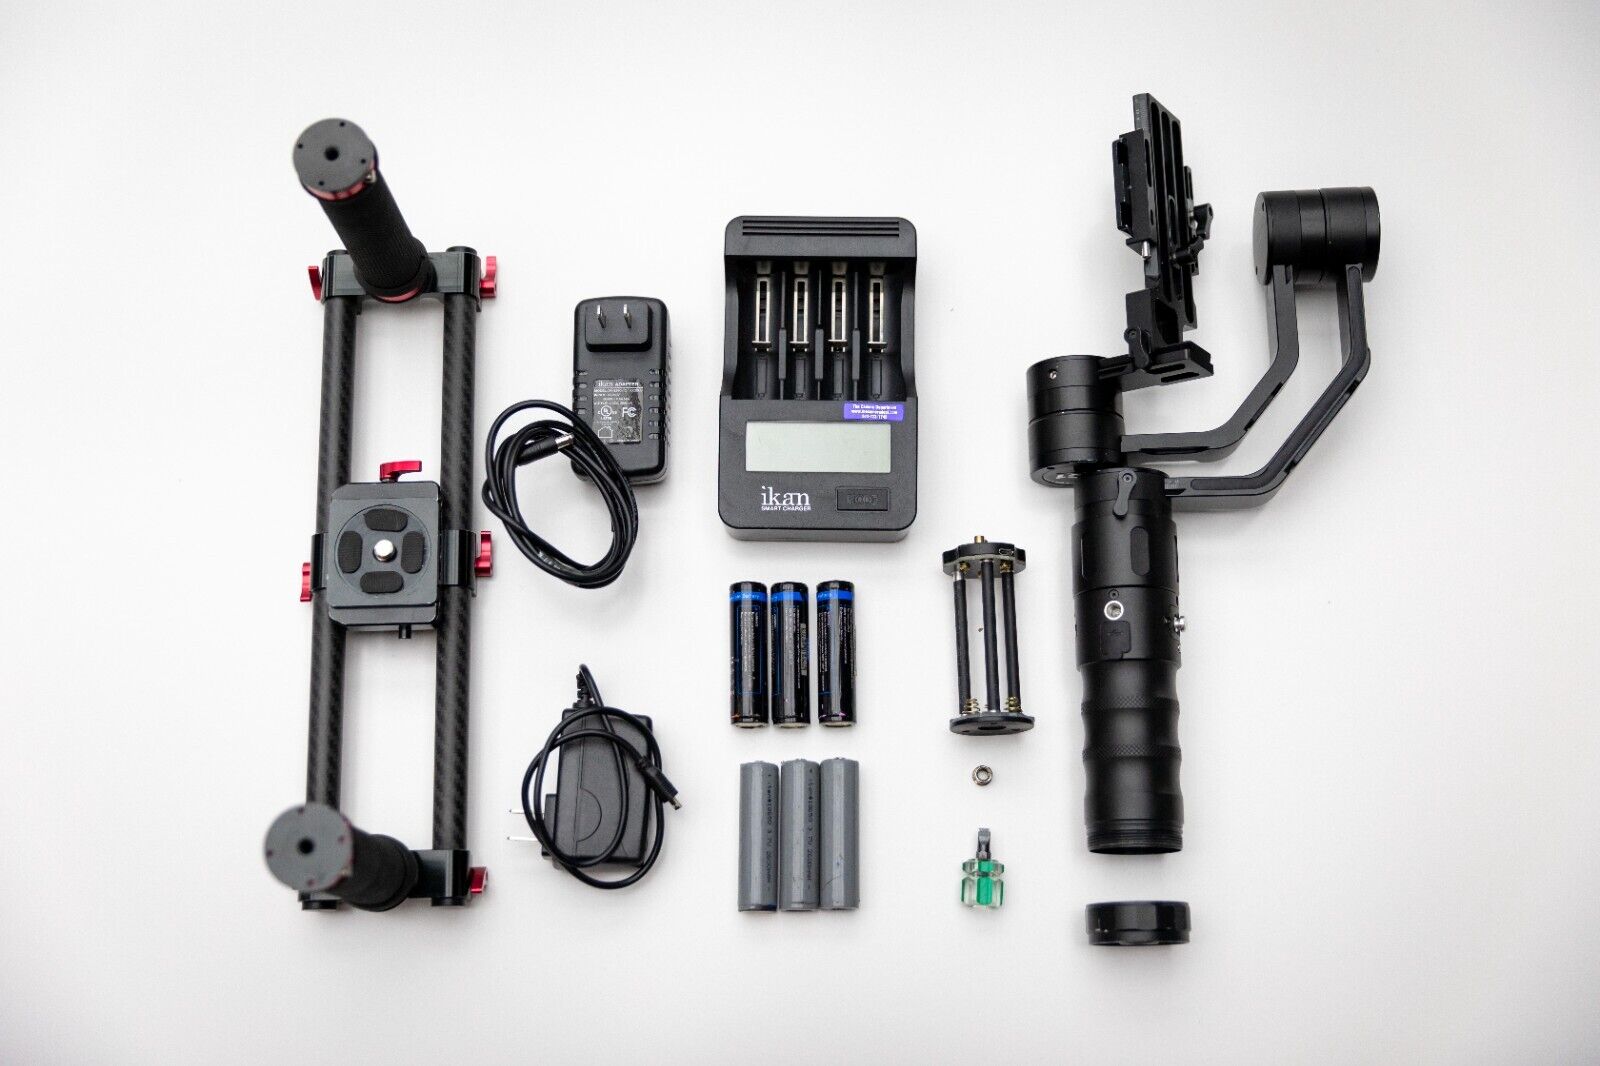 ikan EC1 Beholder 3-Axis Gimbal with Dual-Grip Handle, extra Batteries, & Case